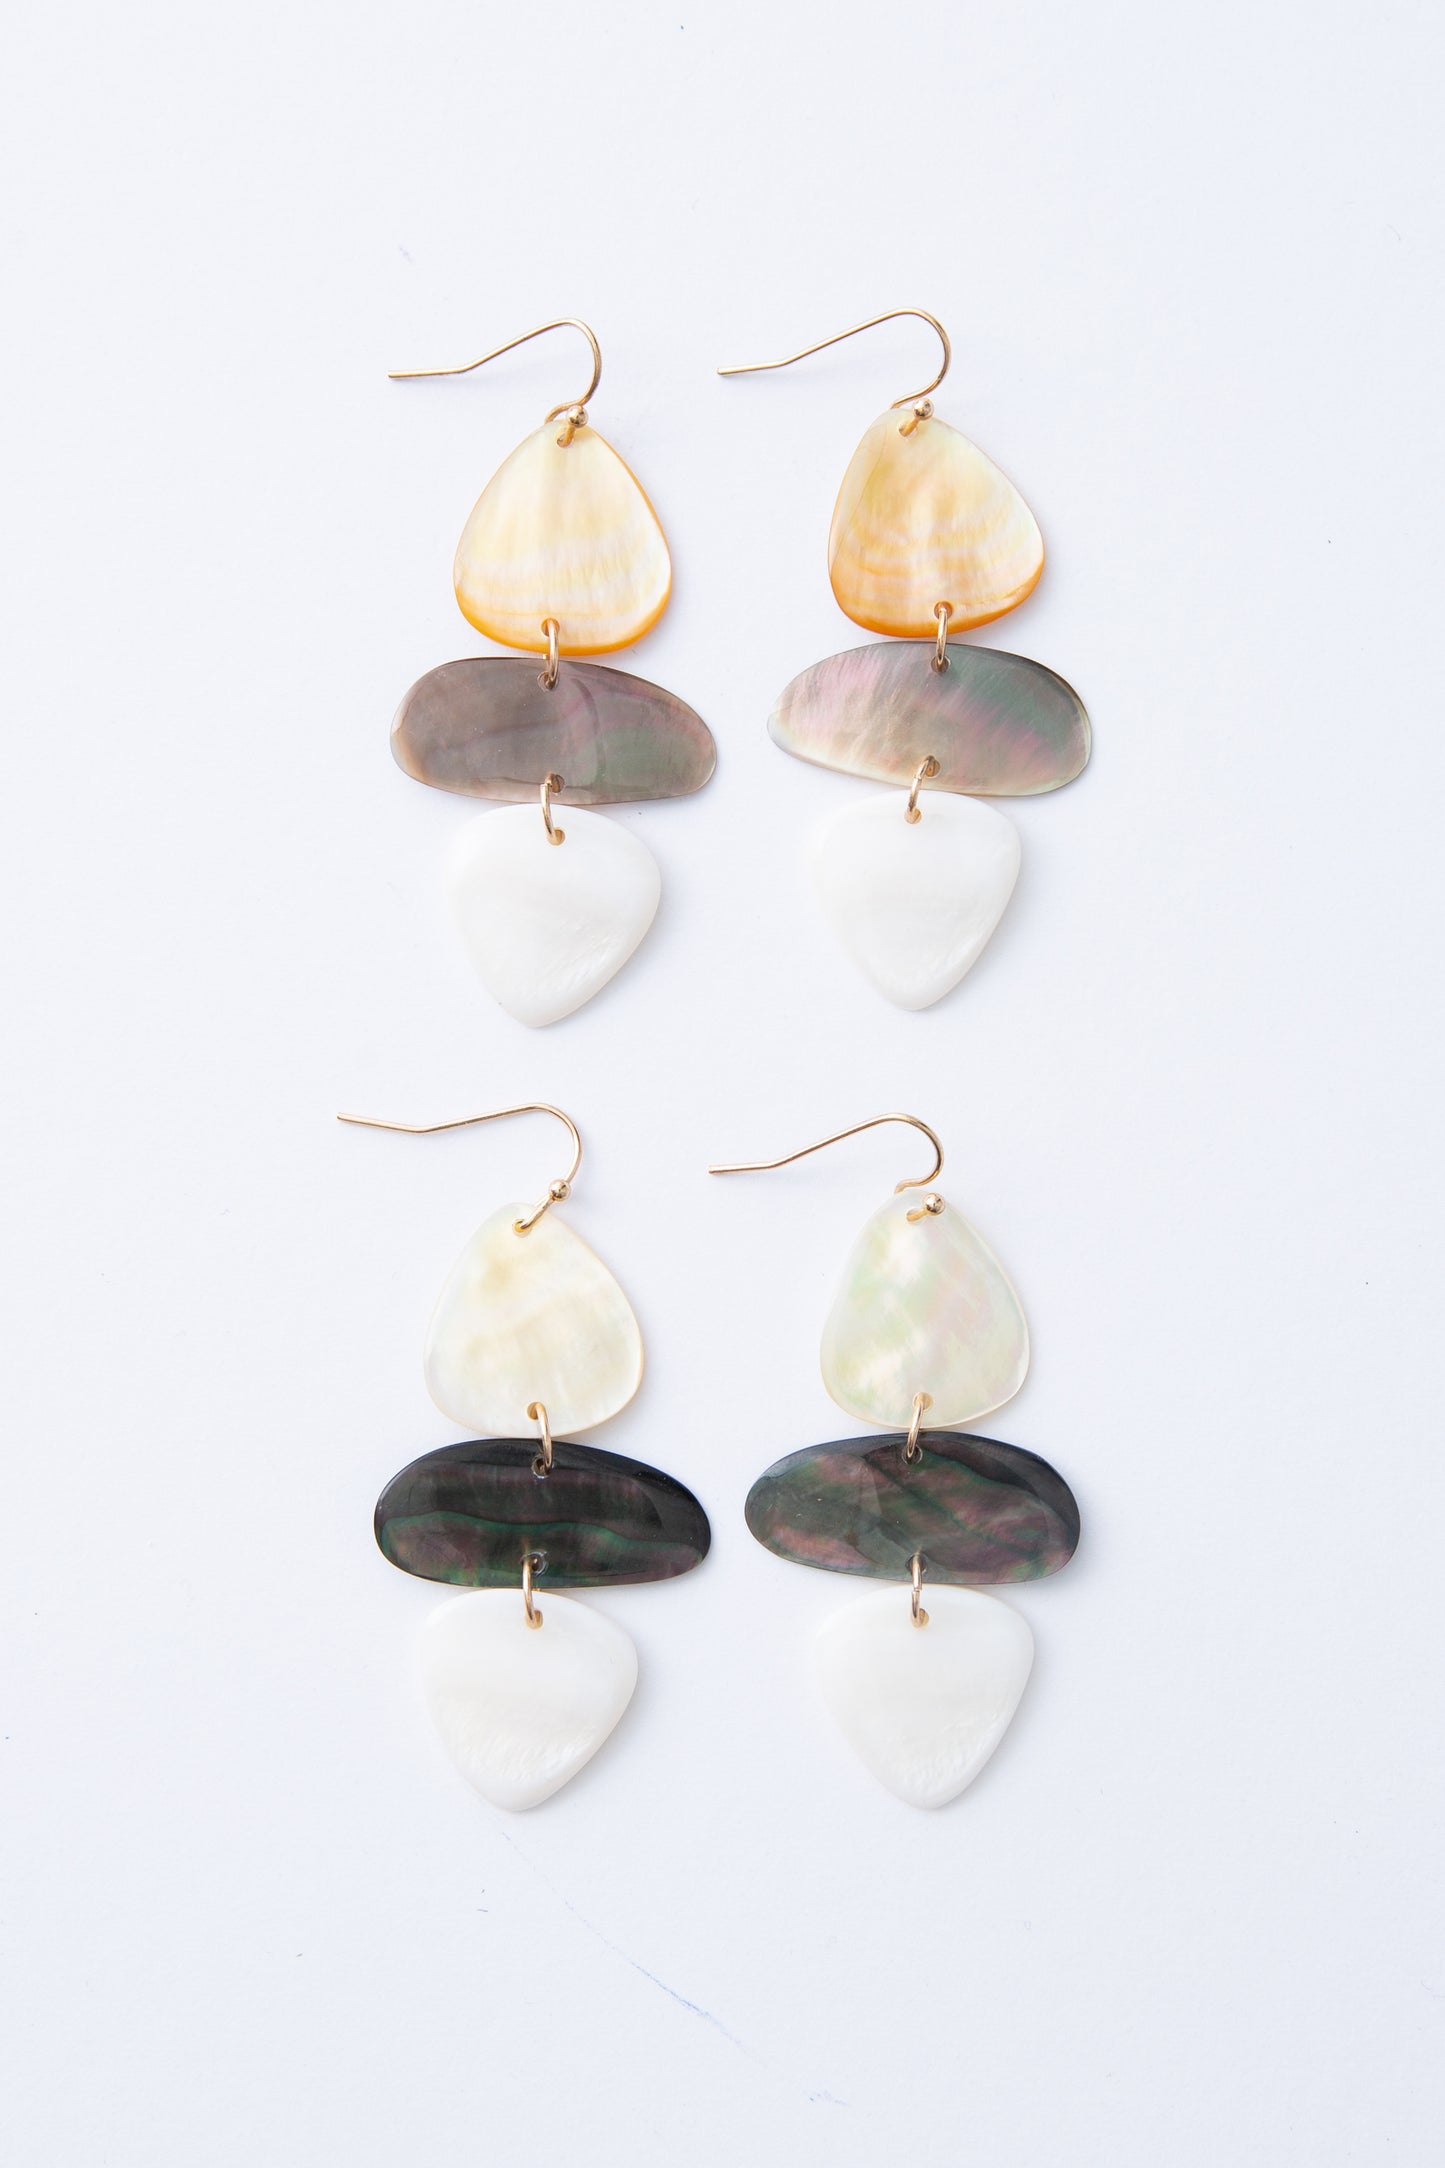 Two pairs of Shell Stack Earrings are shown together, demonstrating the natural variations in color that can occur between pairs. The shell pieces can be either lighter or darker due to the natural shell material.